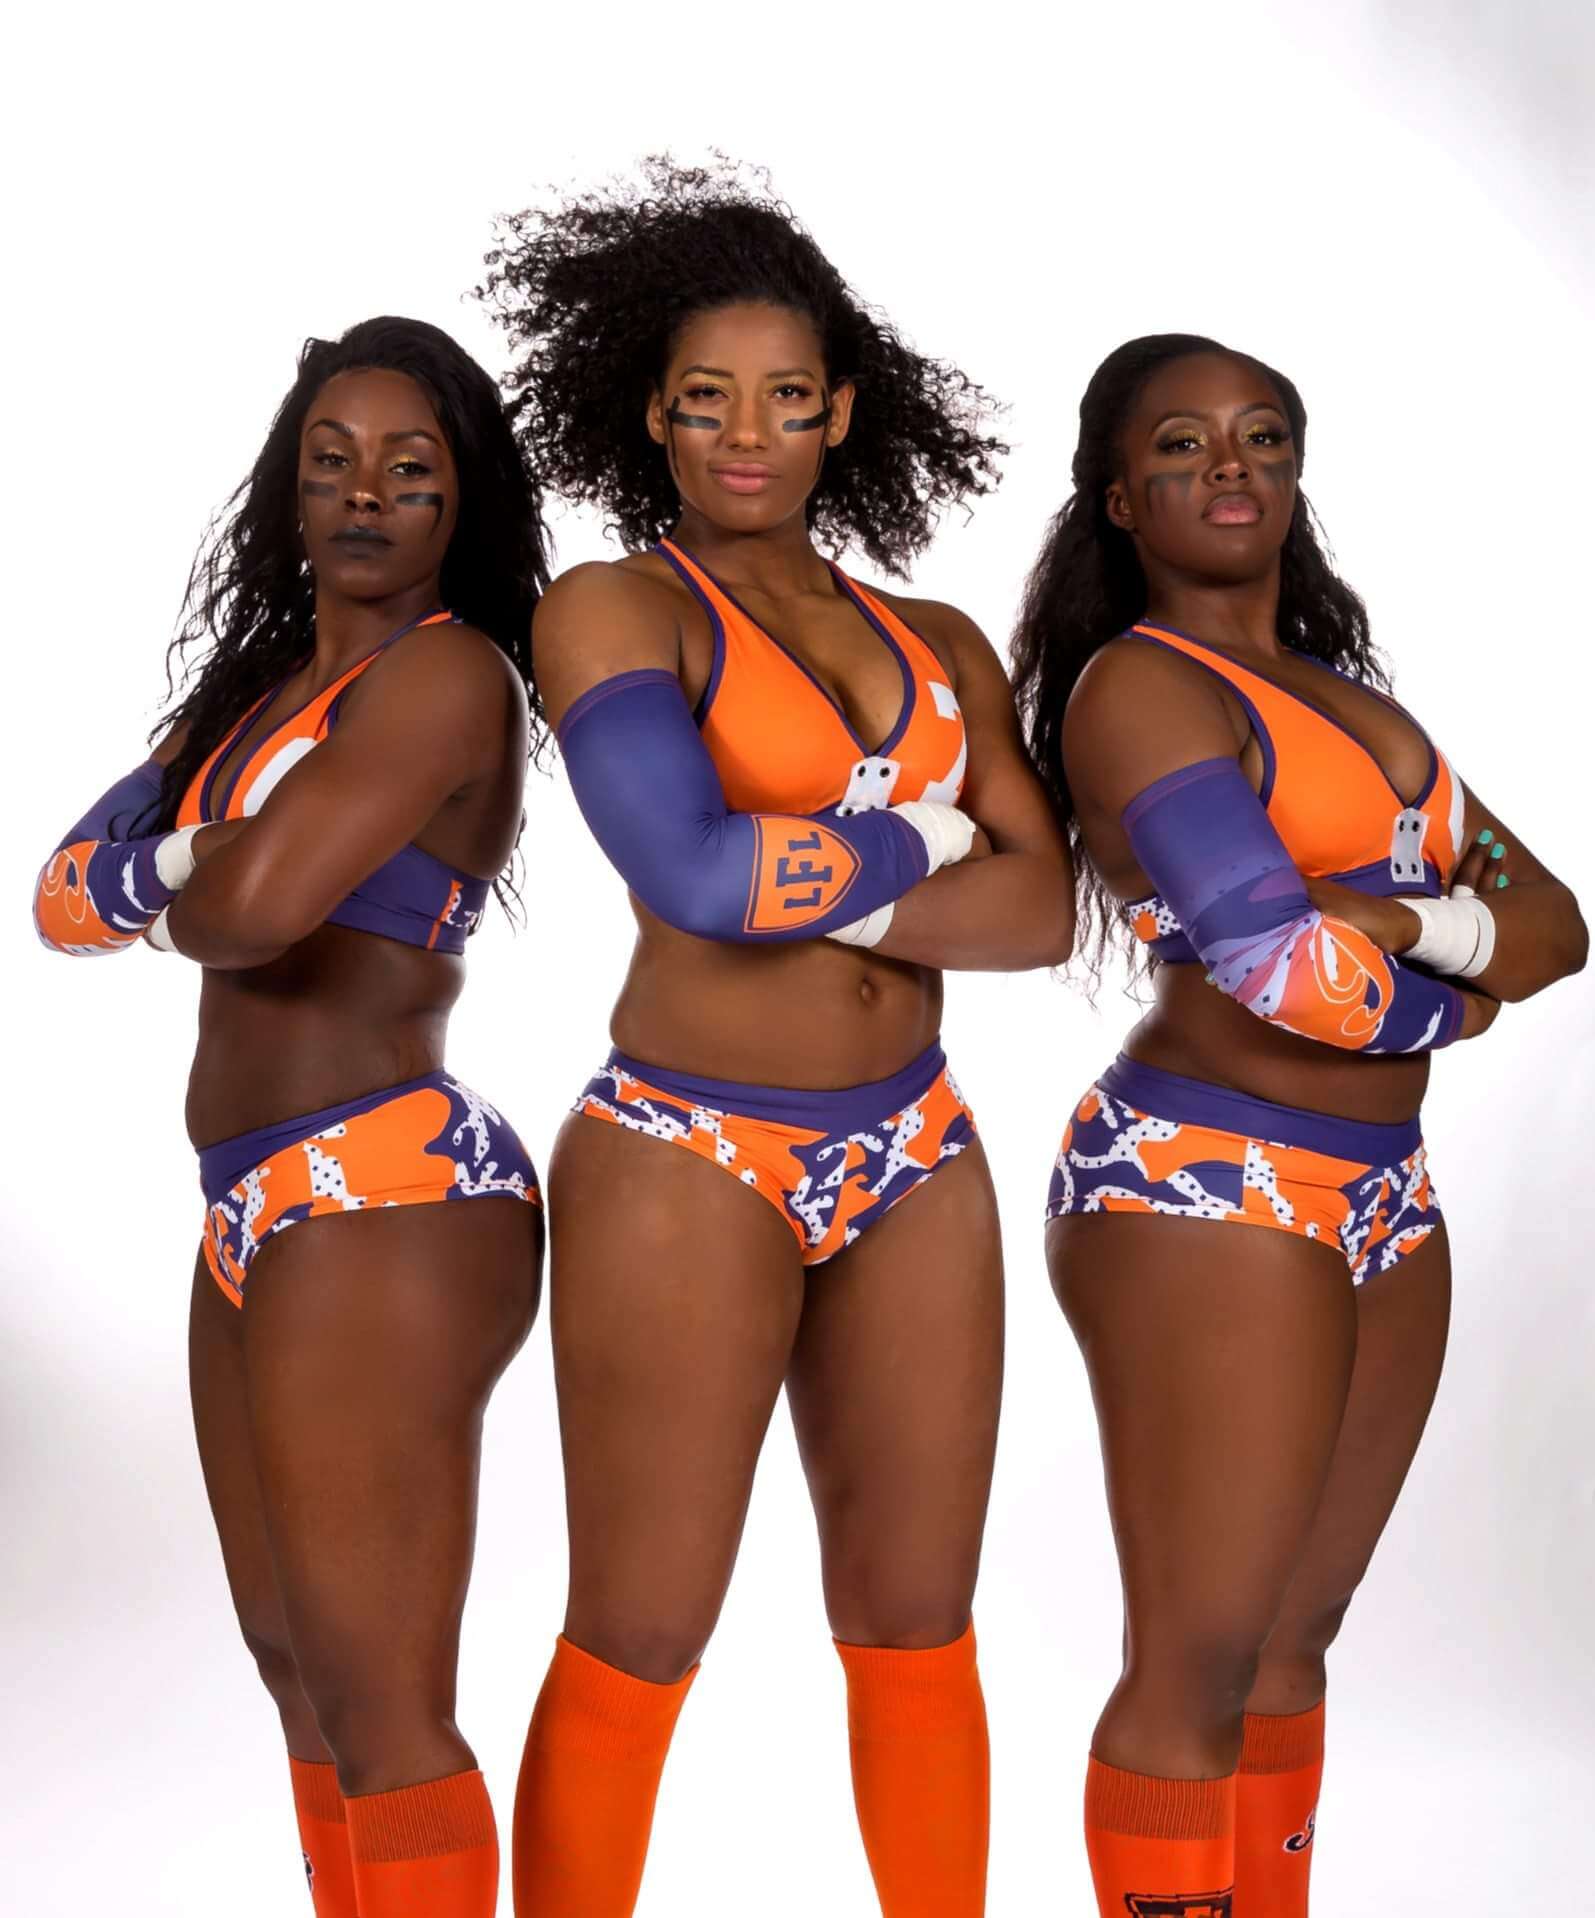 The Legends Football League Beautiful Women And Football, Need We Say Anymore! 37